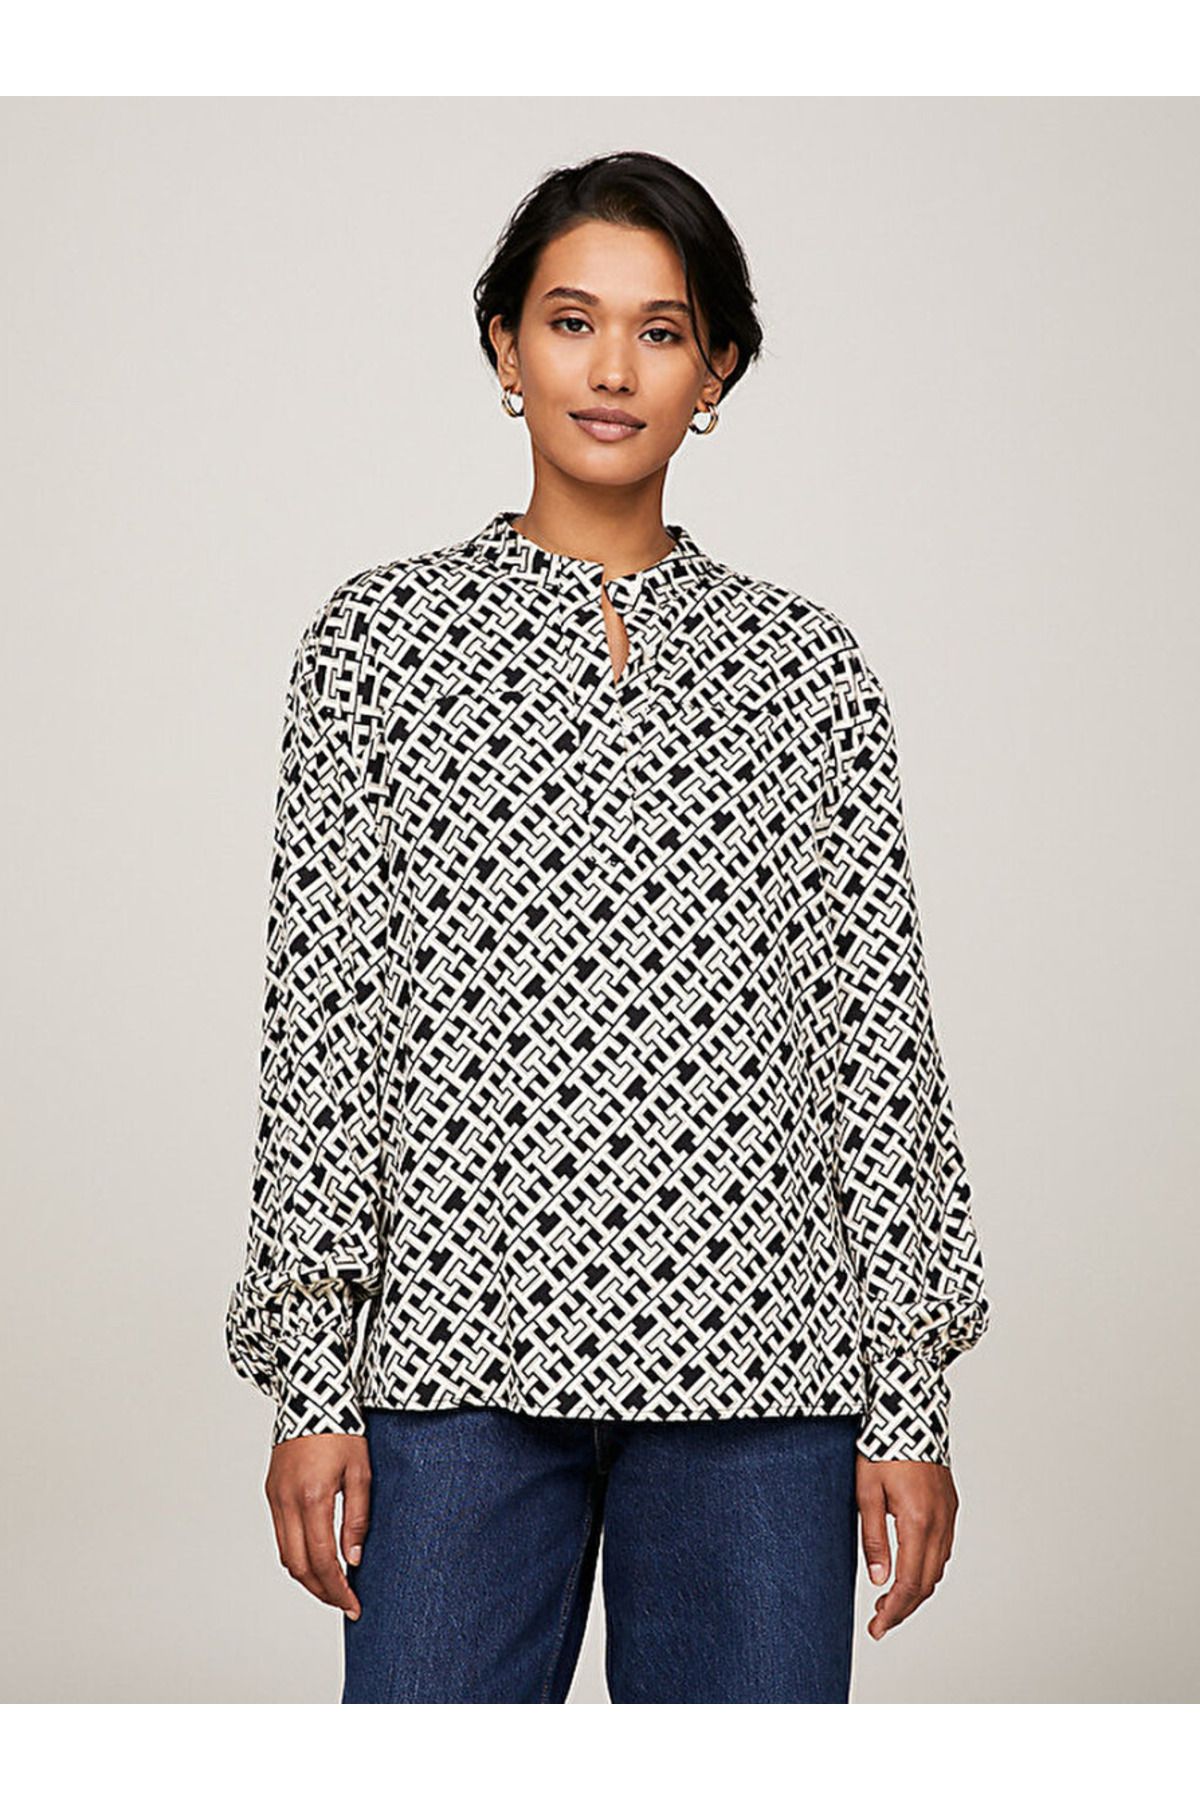 Tommy Hilfiger TH Monogram Relaxed Fit Blouse